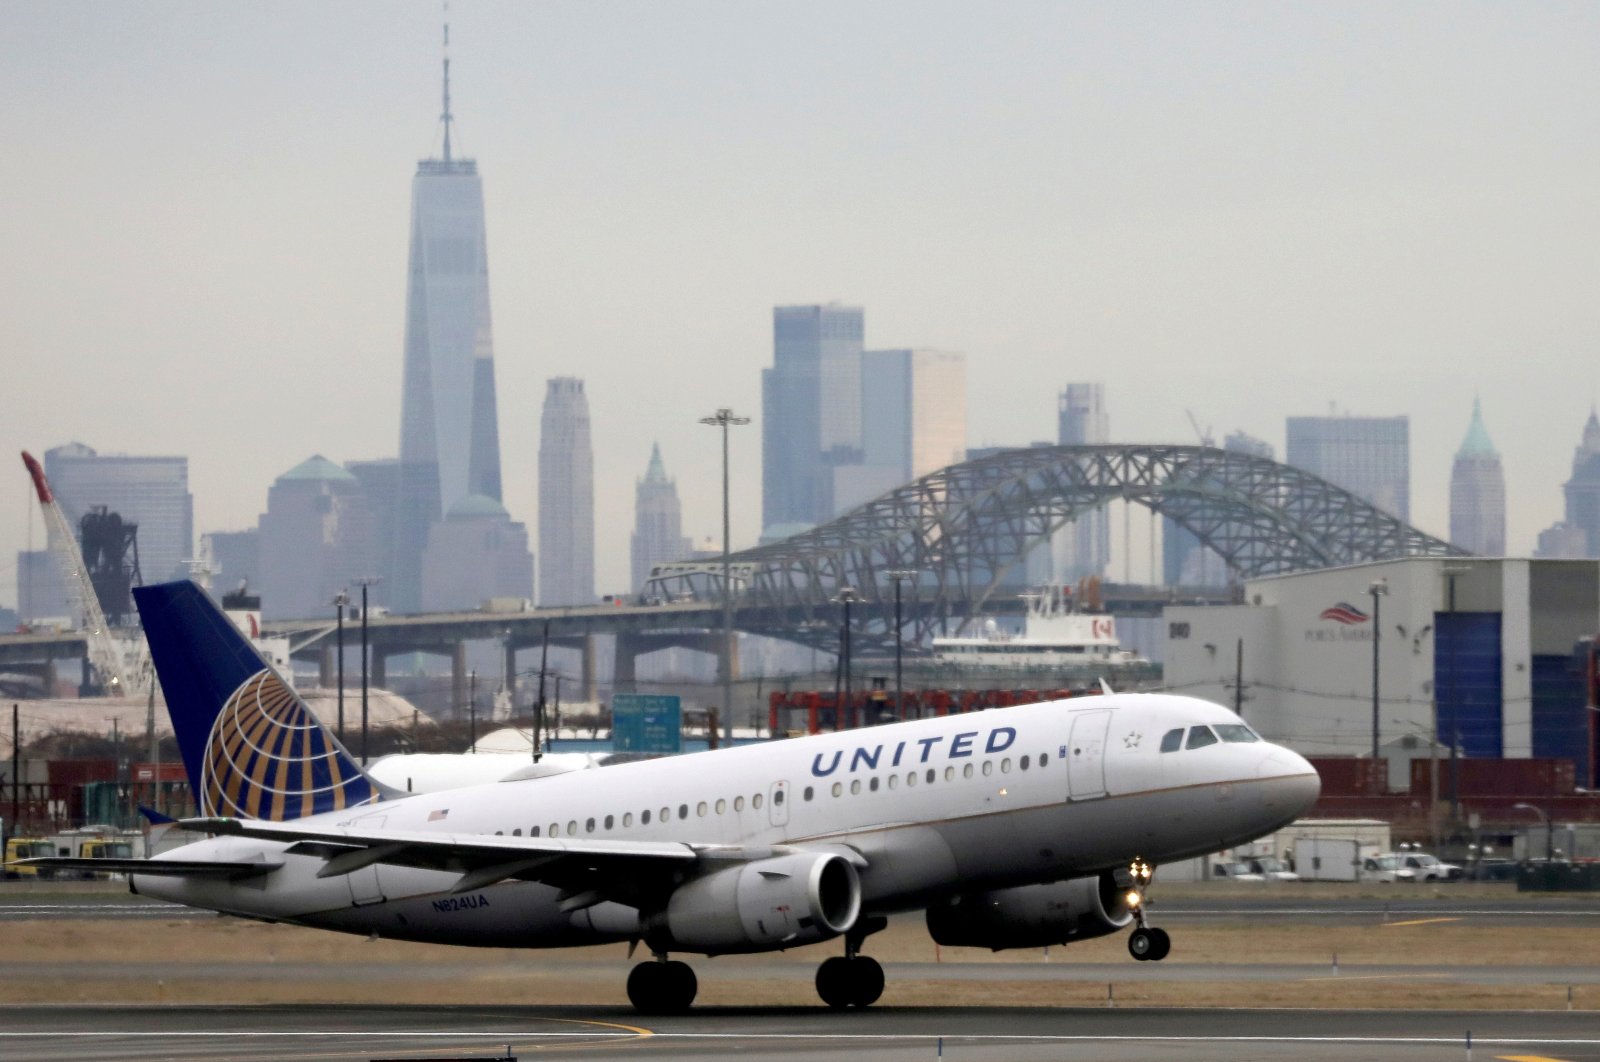 A United Airlines passenger jet takes off with New York City as a backdrop, at Newark Liberty International Airport, New Jersey, U.S., Dec. 6, 2019. (Reuters Photo)